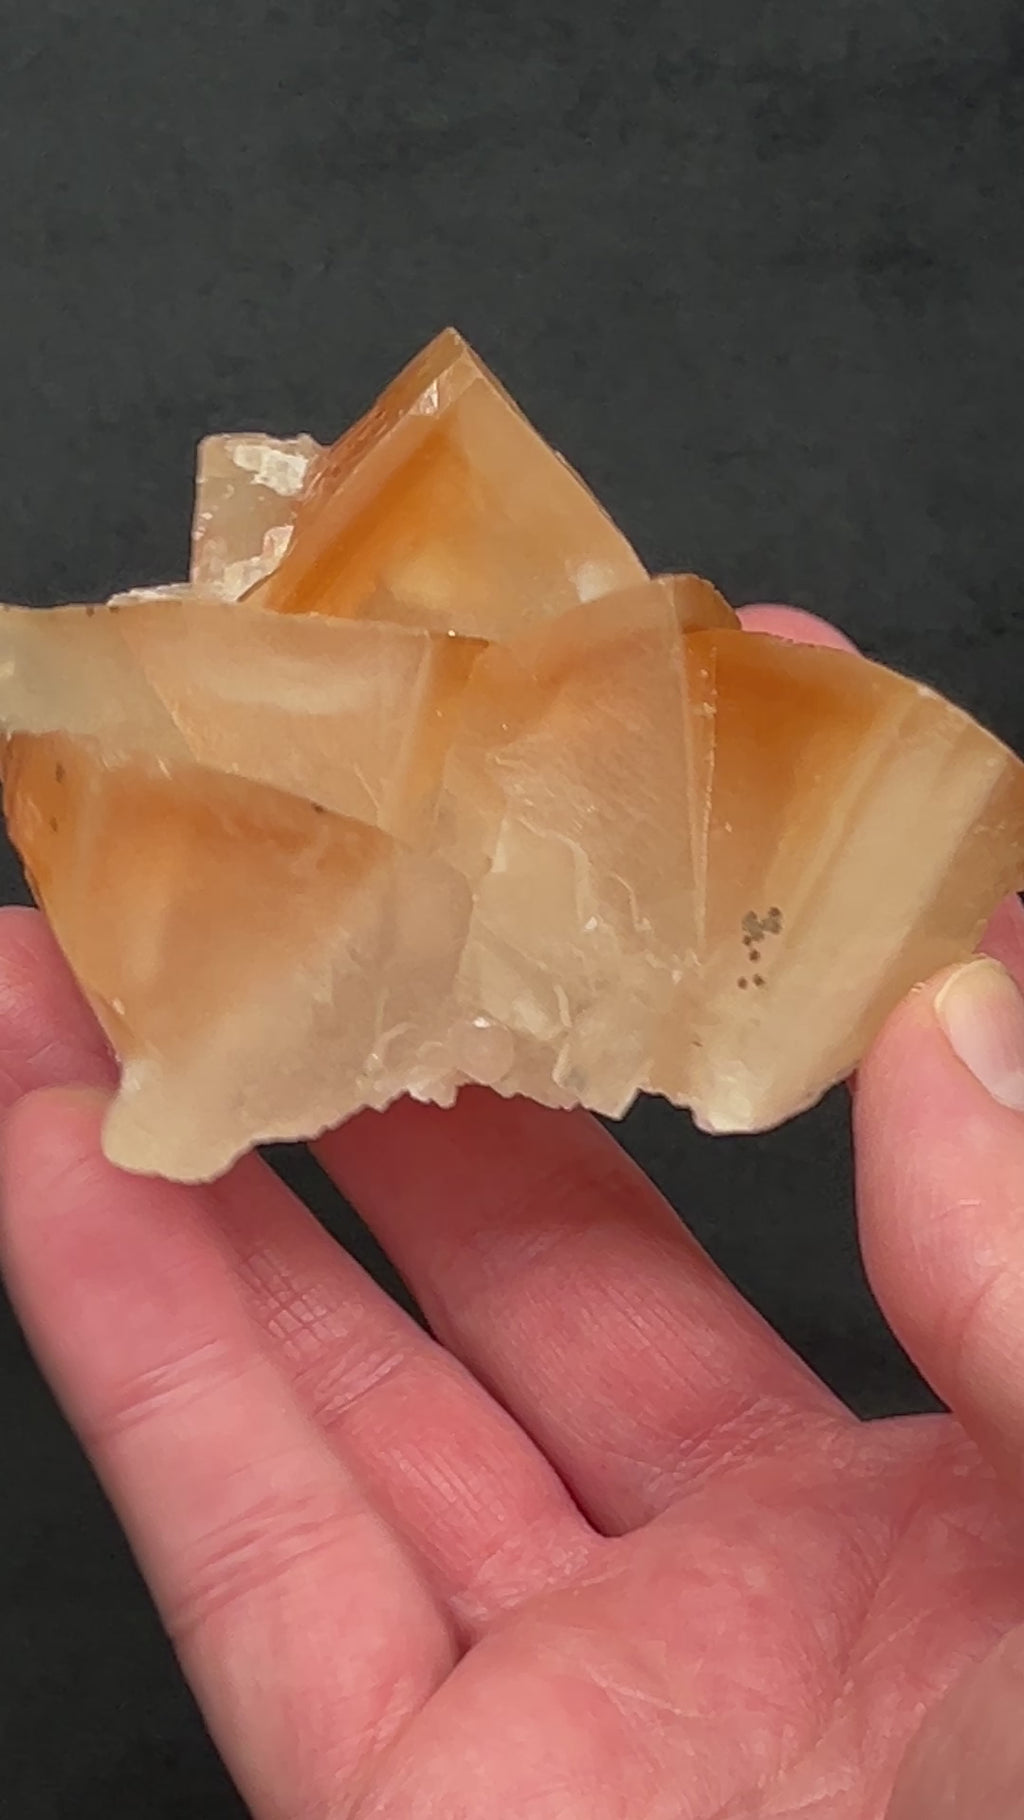 These truly gorgeous Calcite crystals with phantoms are from the Buena Tierra Mine, Francisco Portillo, West Camp, Santa Eulalia District, Chihuahua, Mexico   